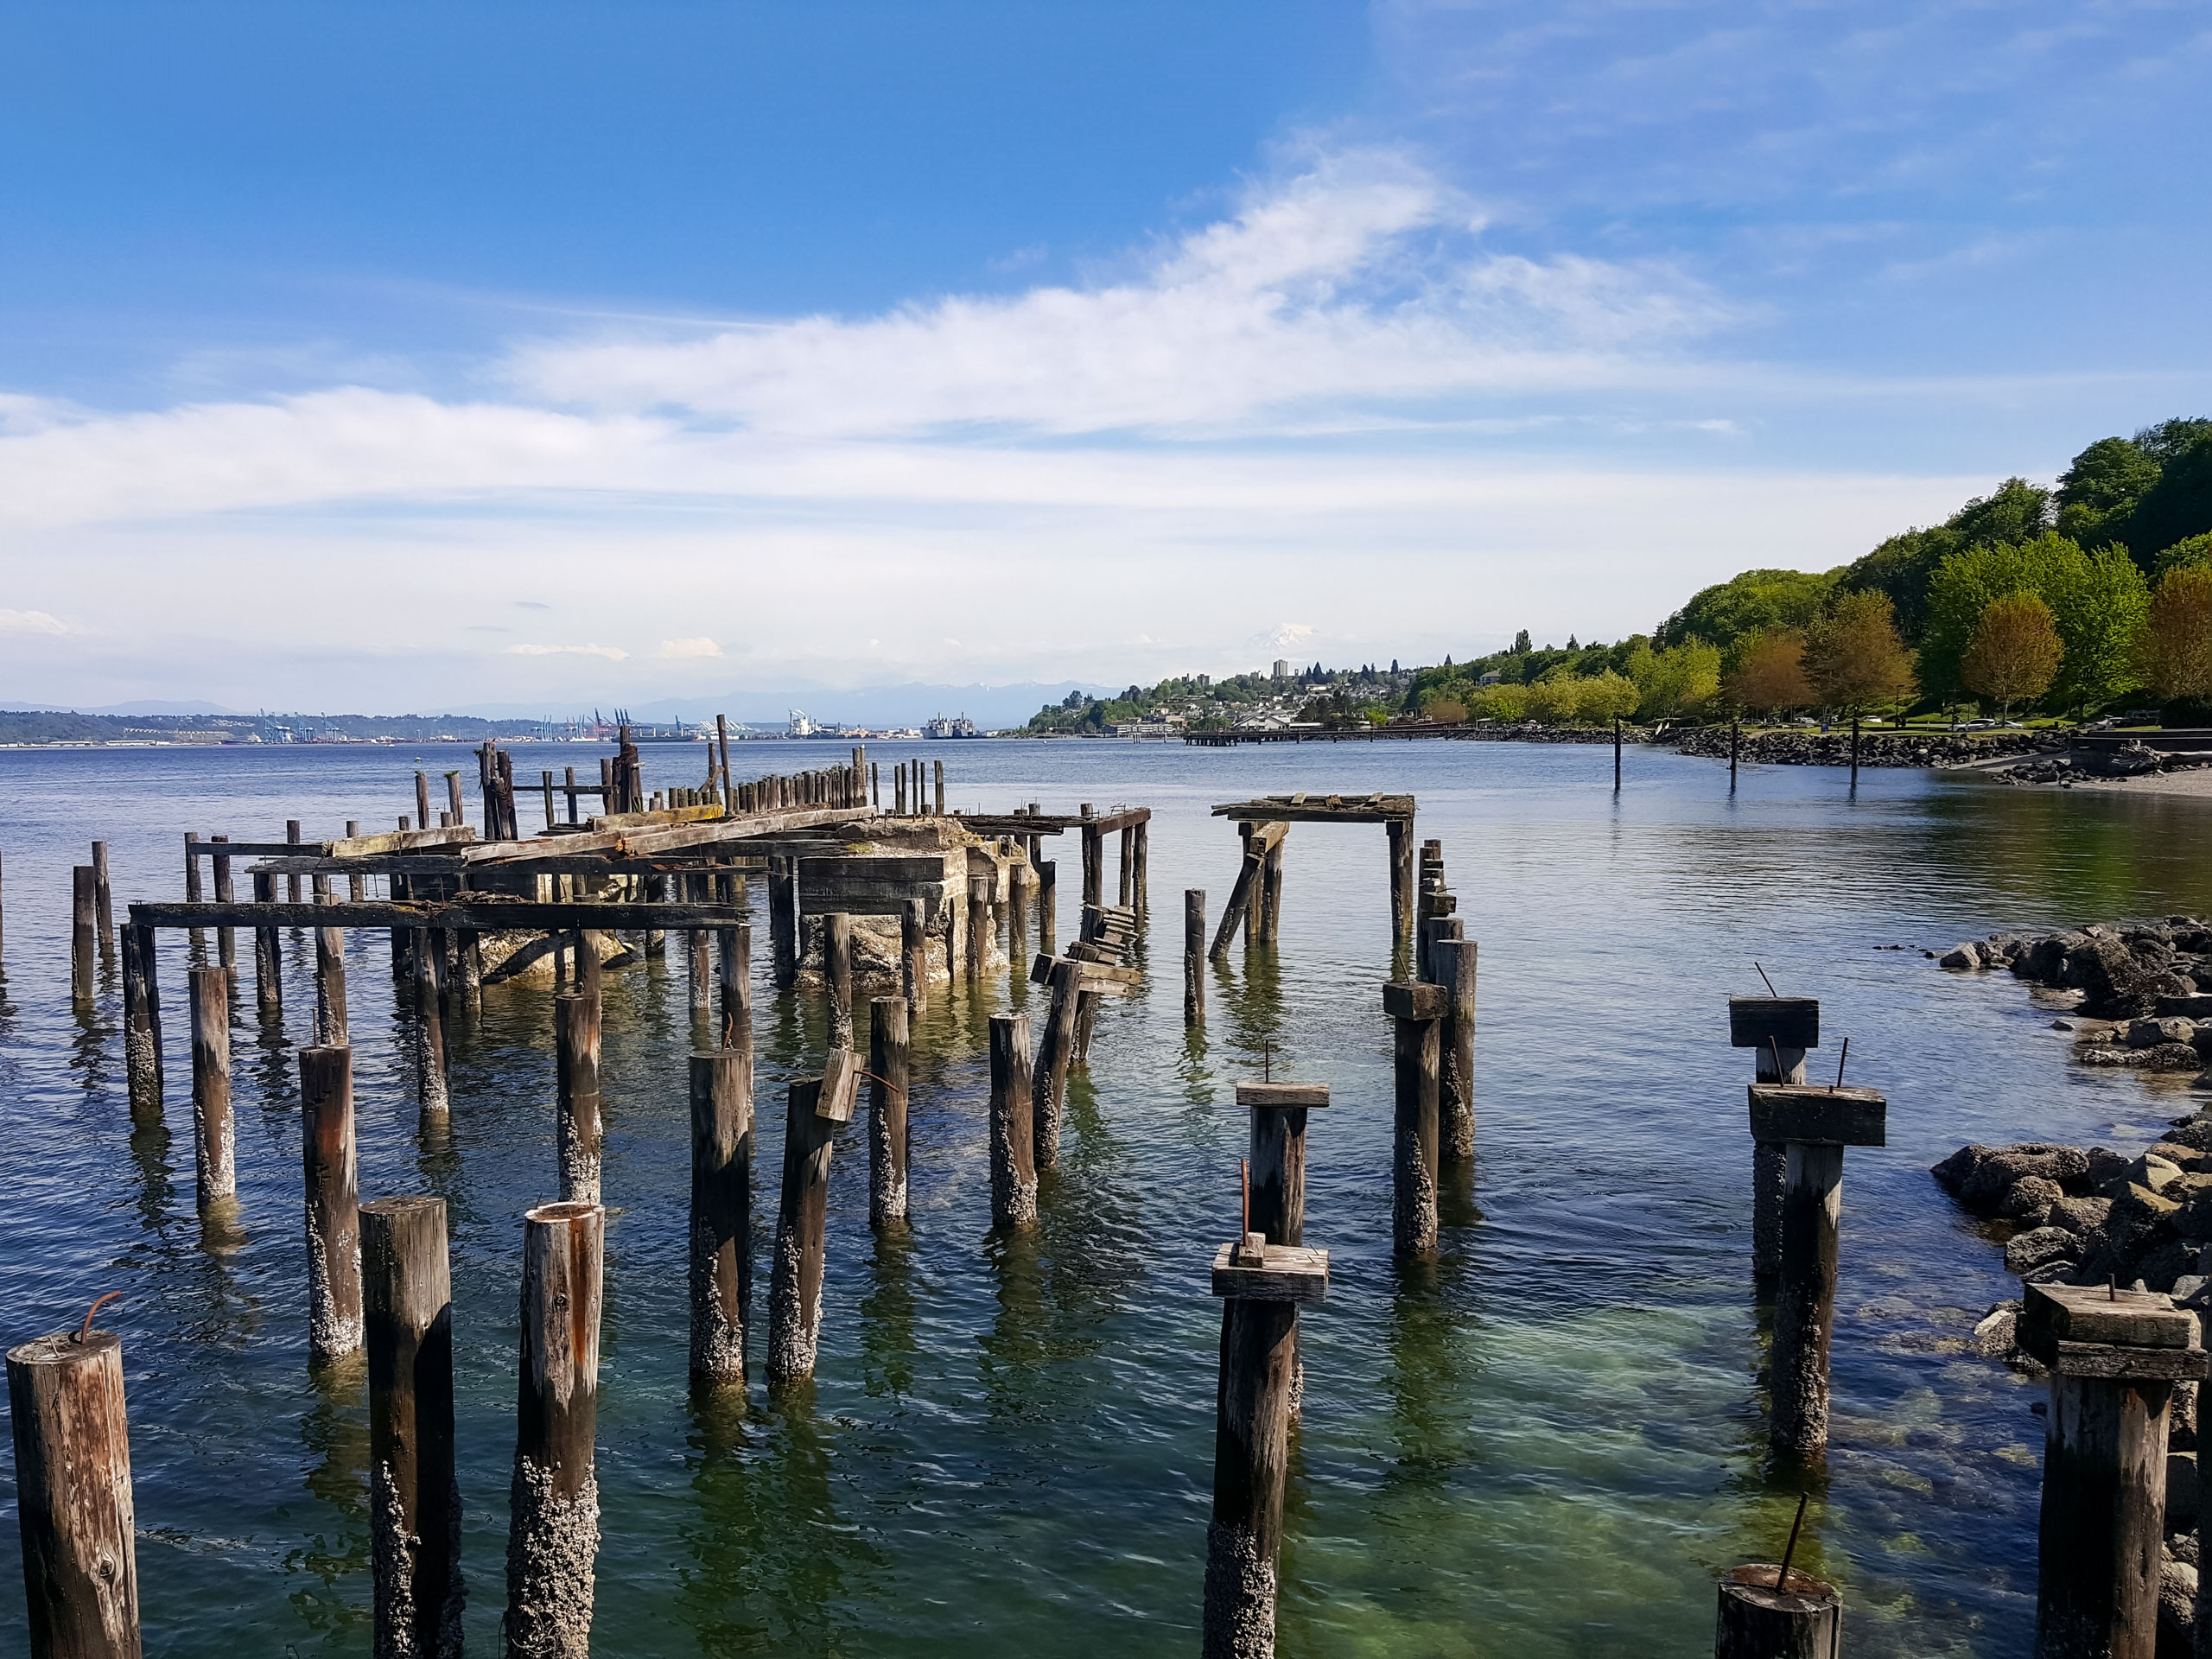 Remains of old pier on the Pacific coast of Tacoma